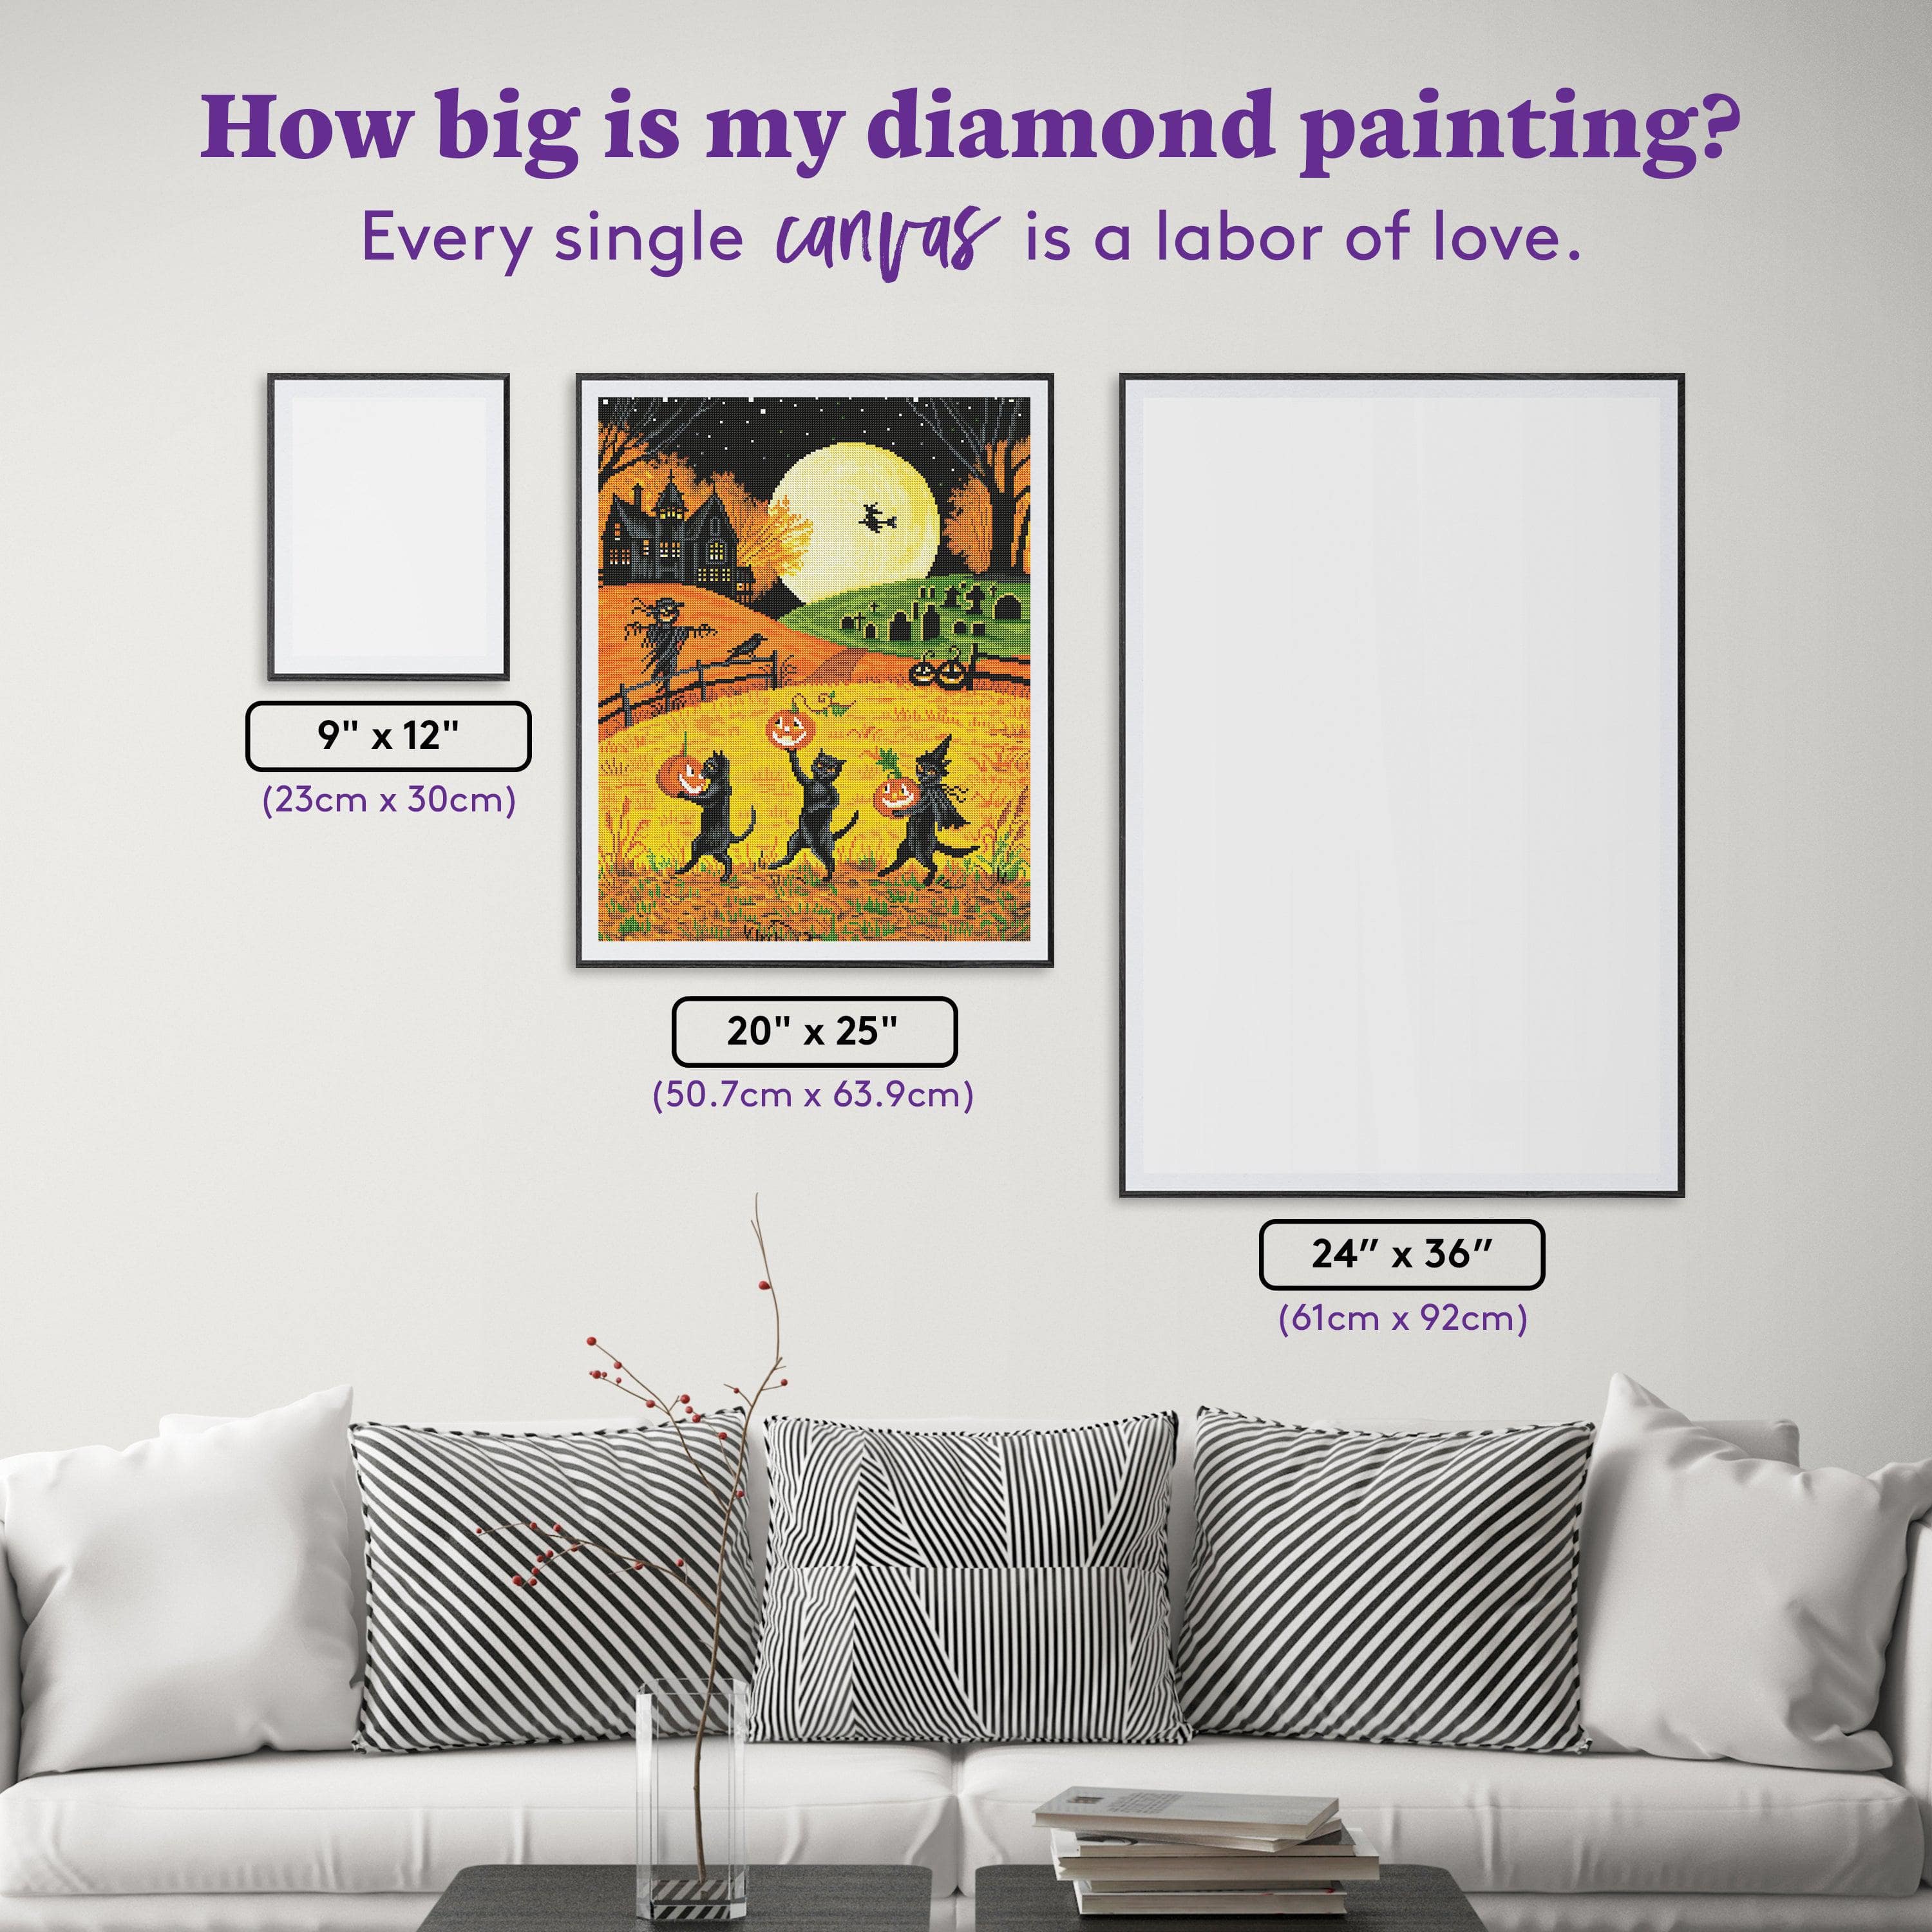 Just a Girl Who Loves Diamond Painting Poster for Sale by jaygo